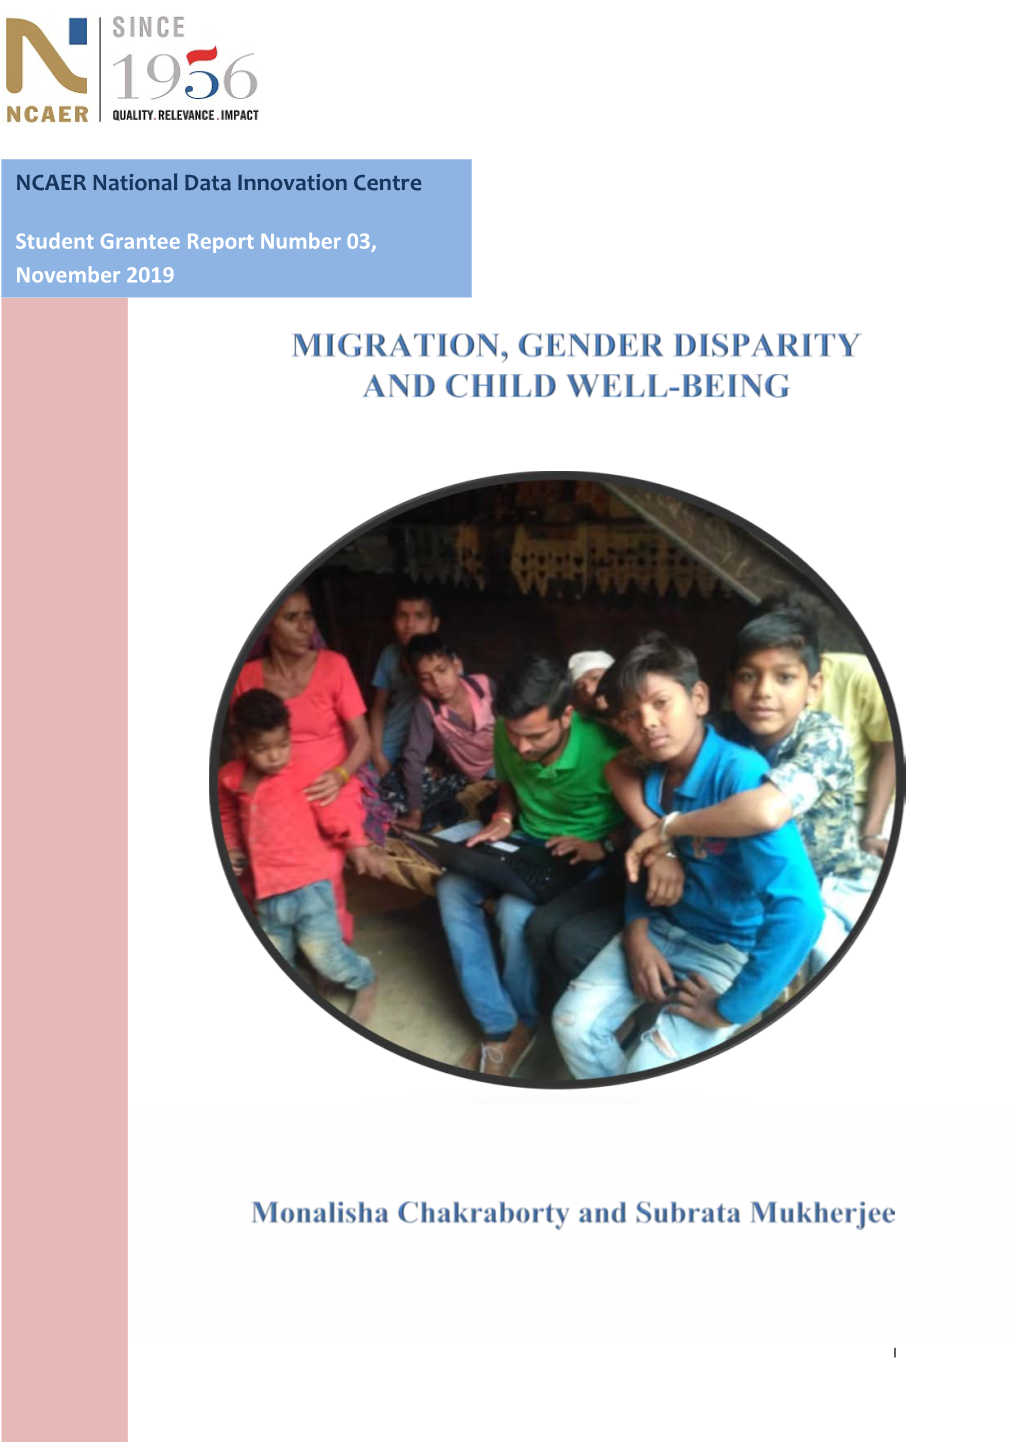 Migration, Gender Disparity, and Child Well-Being